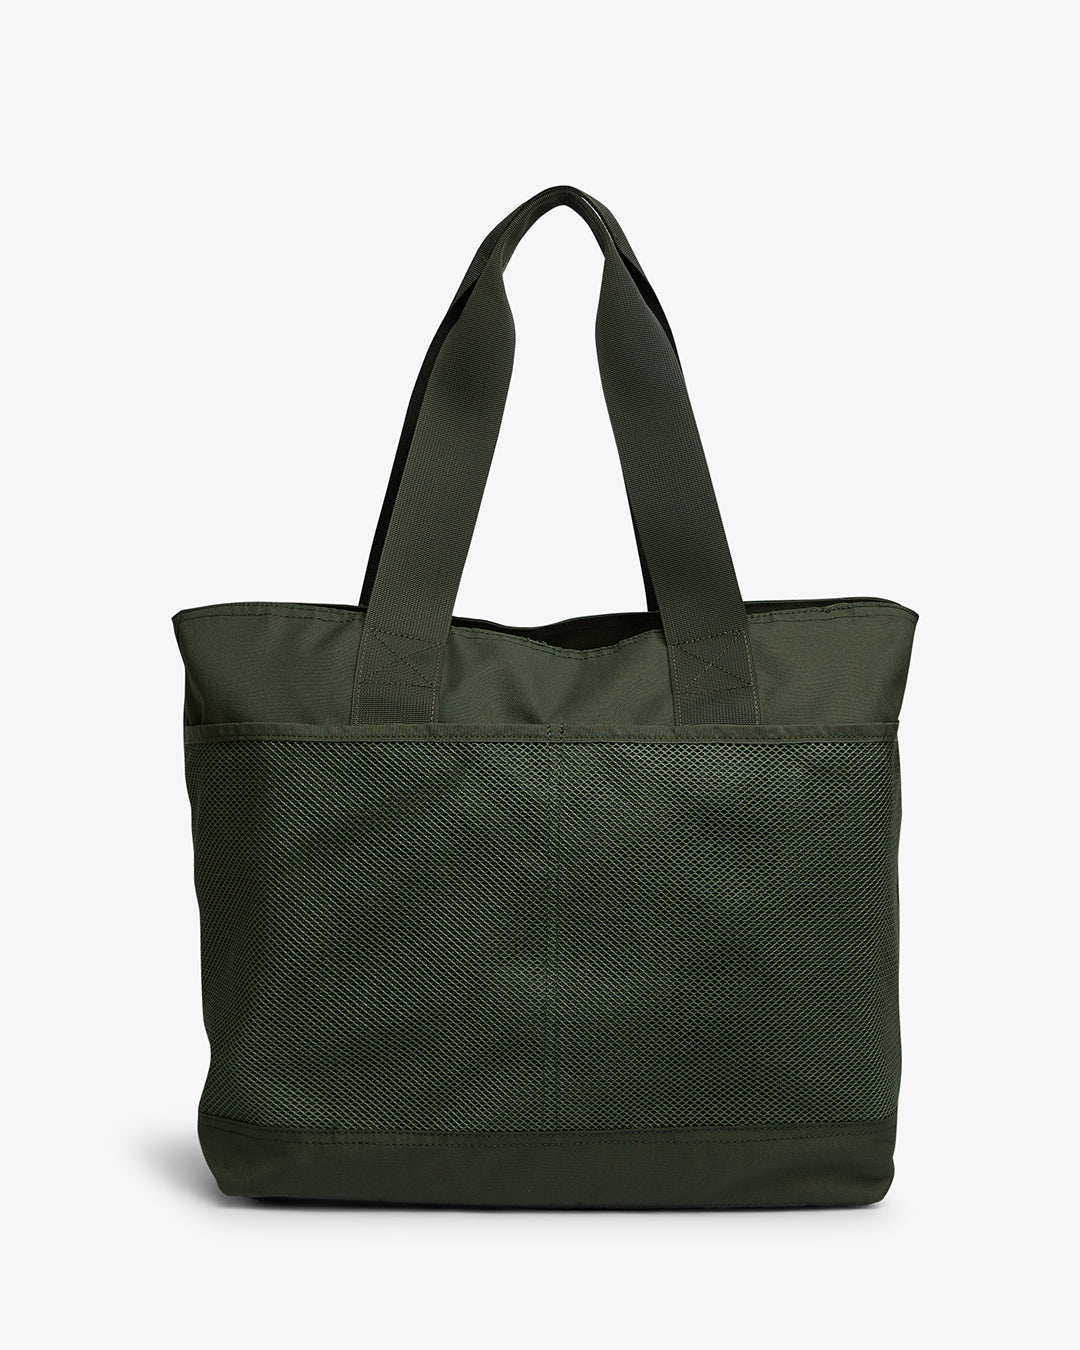 Top Time Carry All Tote - Lichen Green